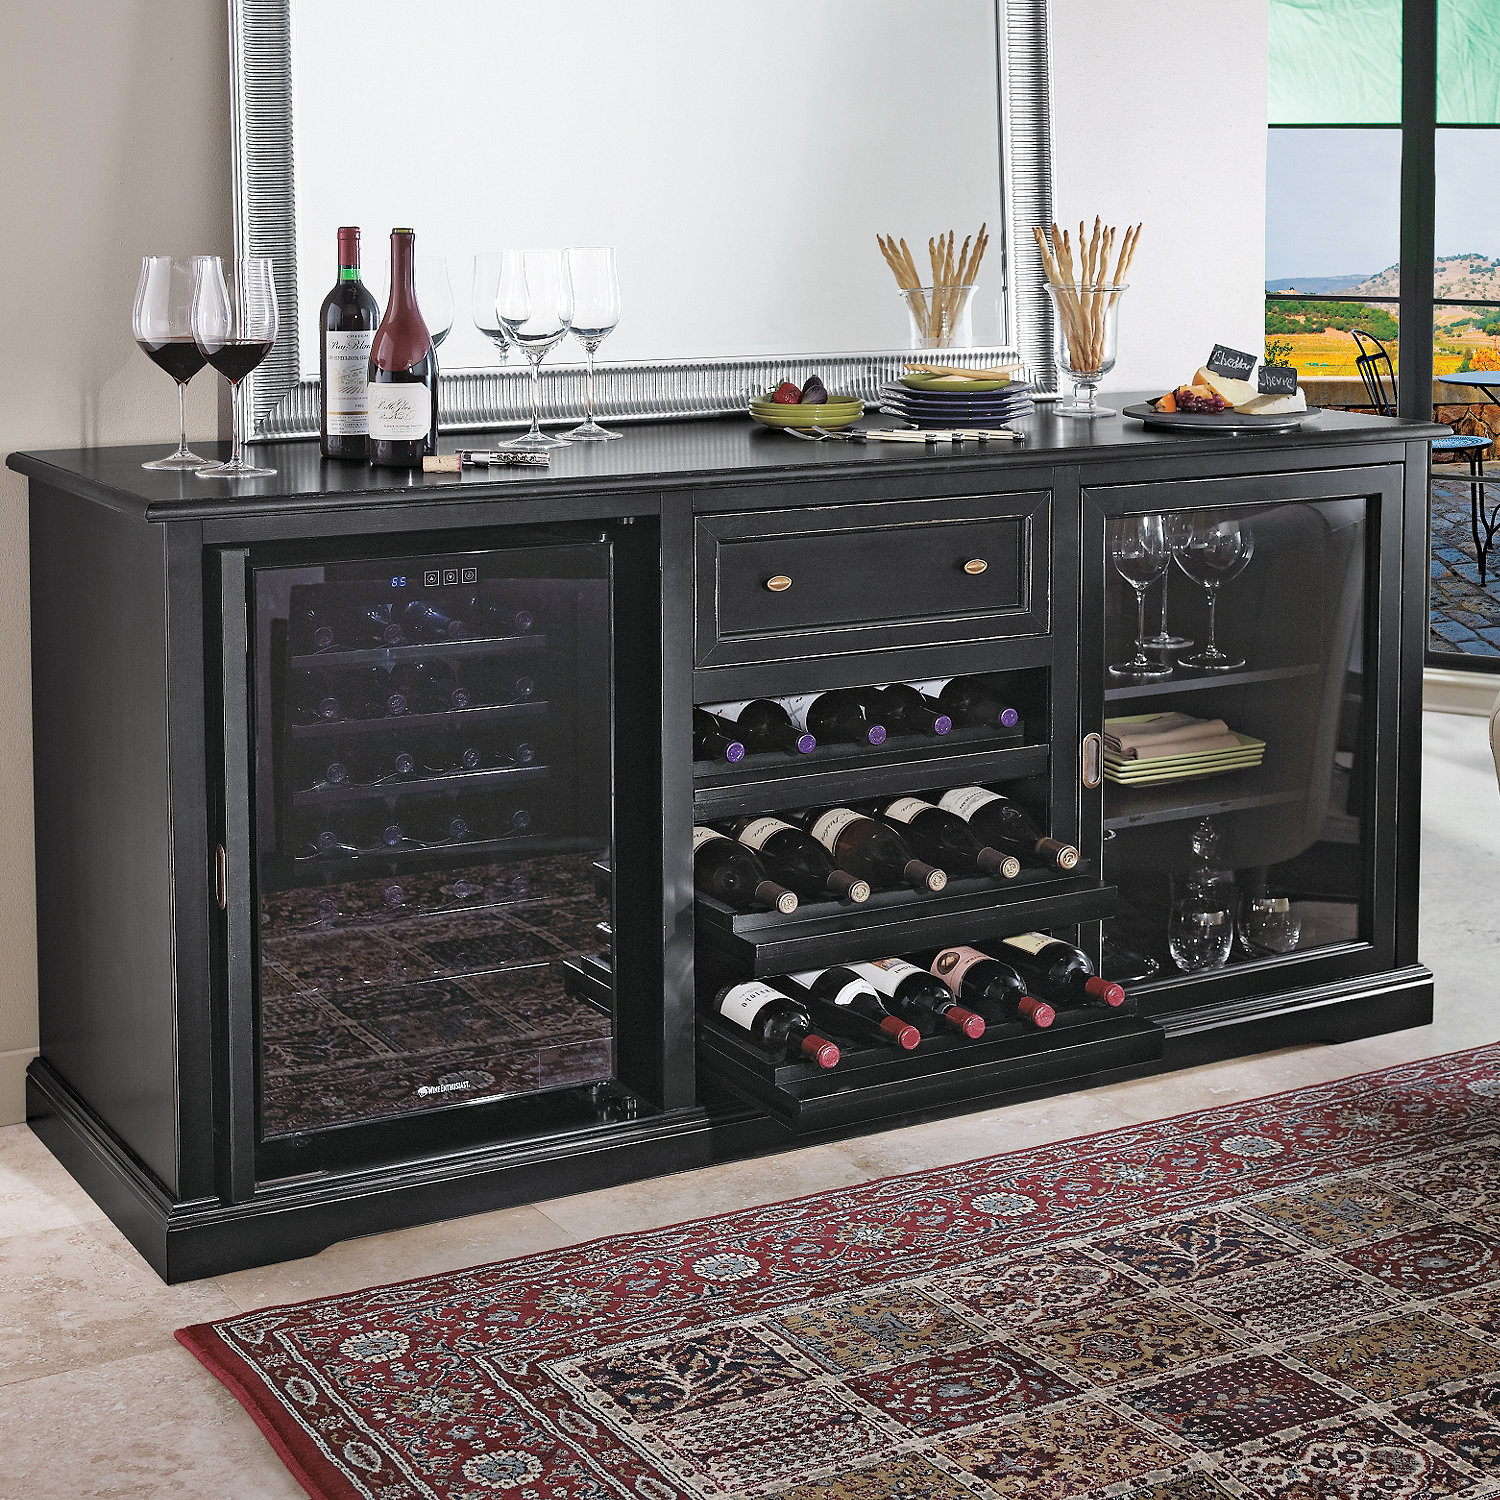 Know about Wine refrigerators